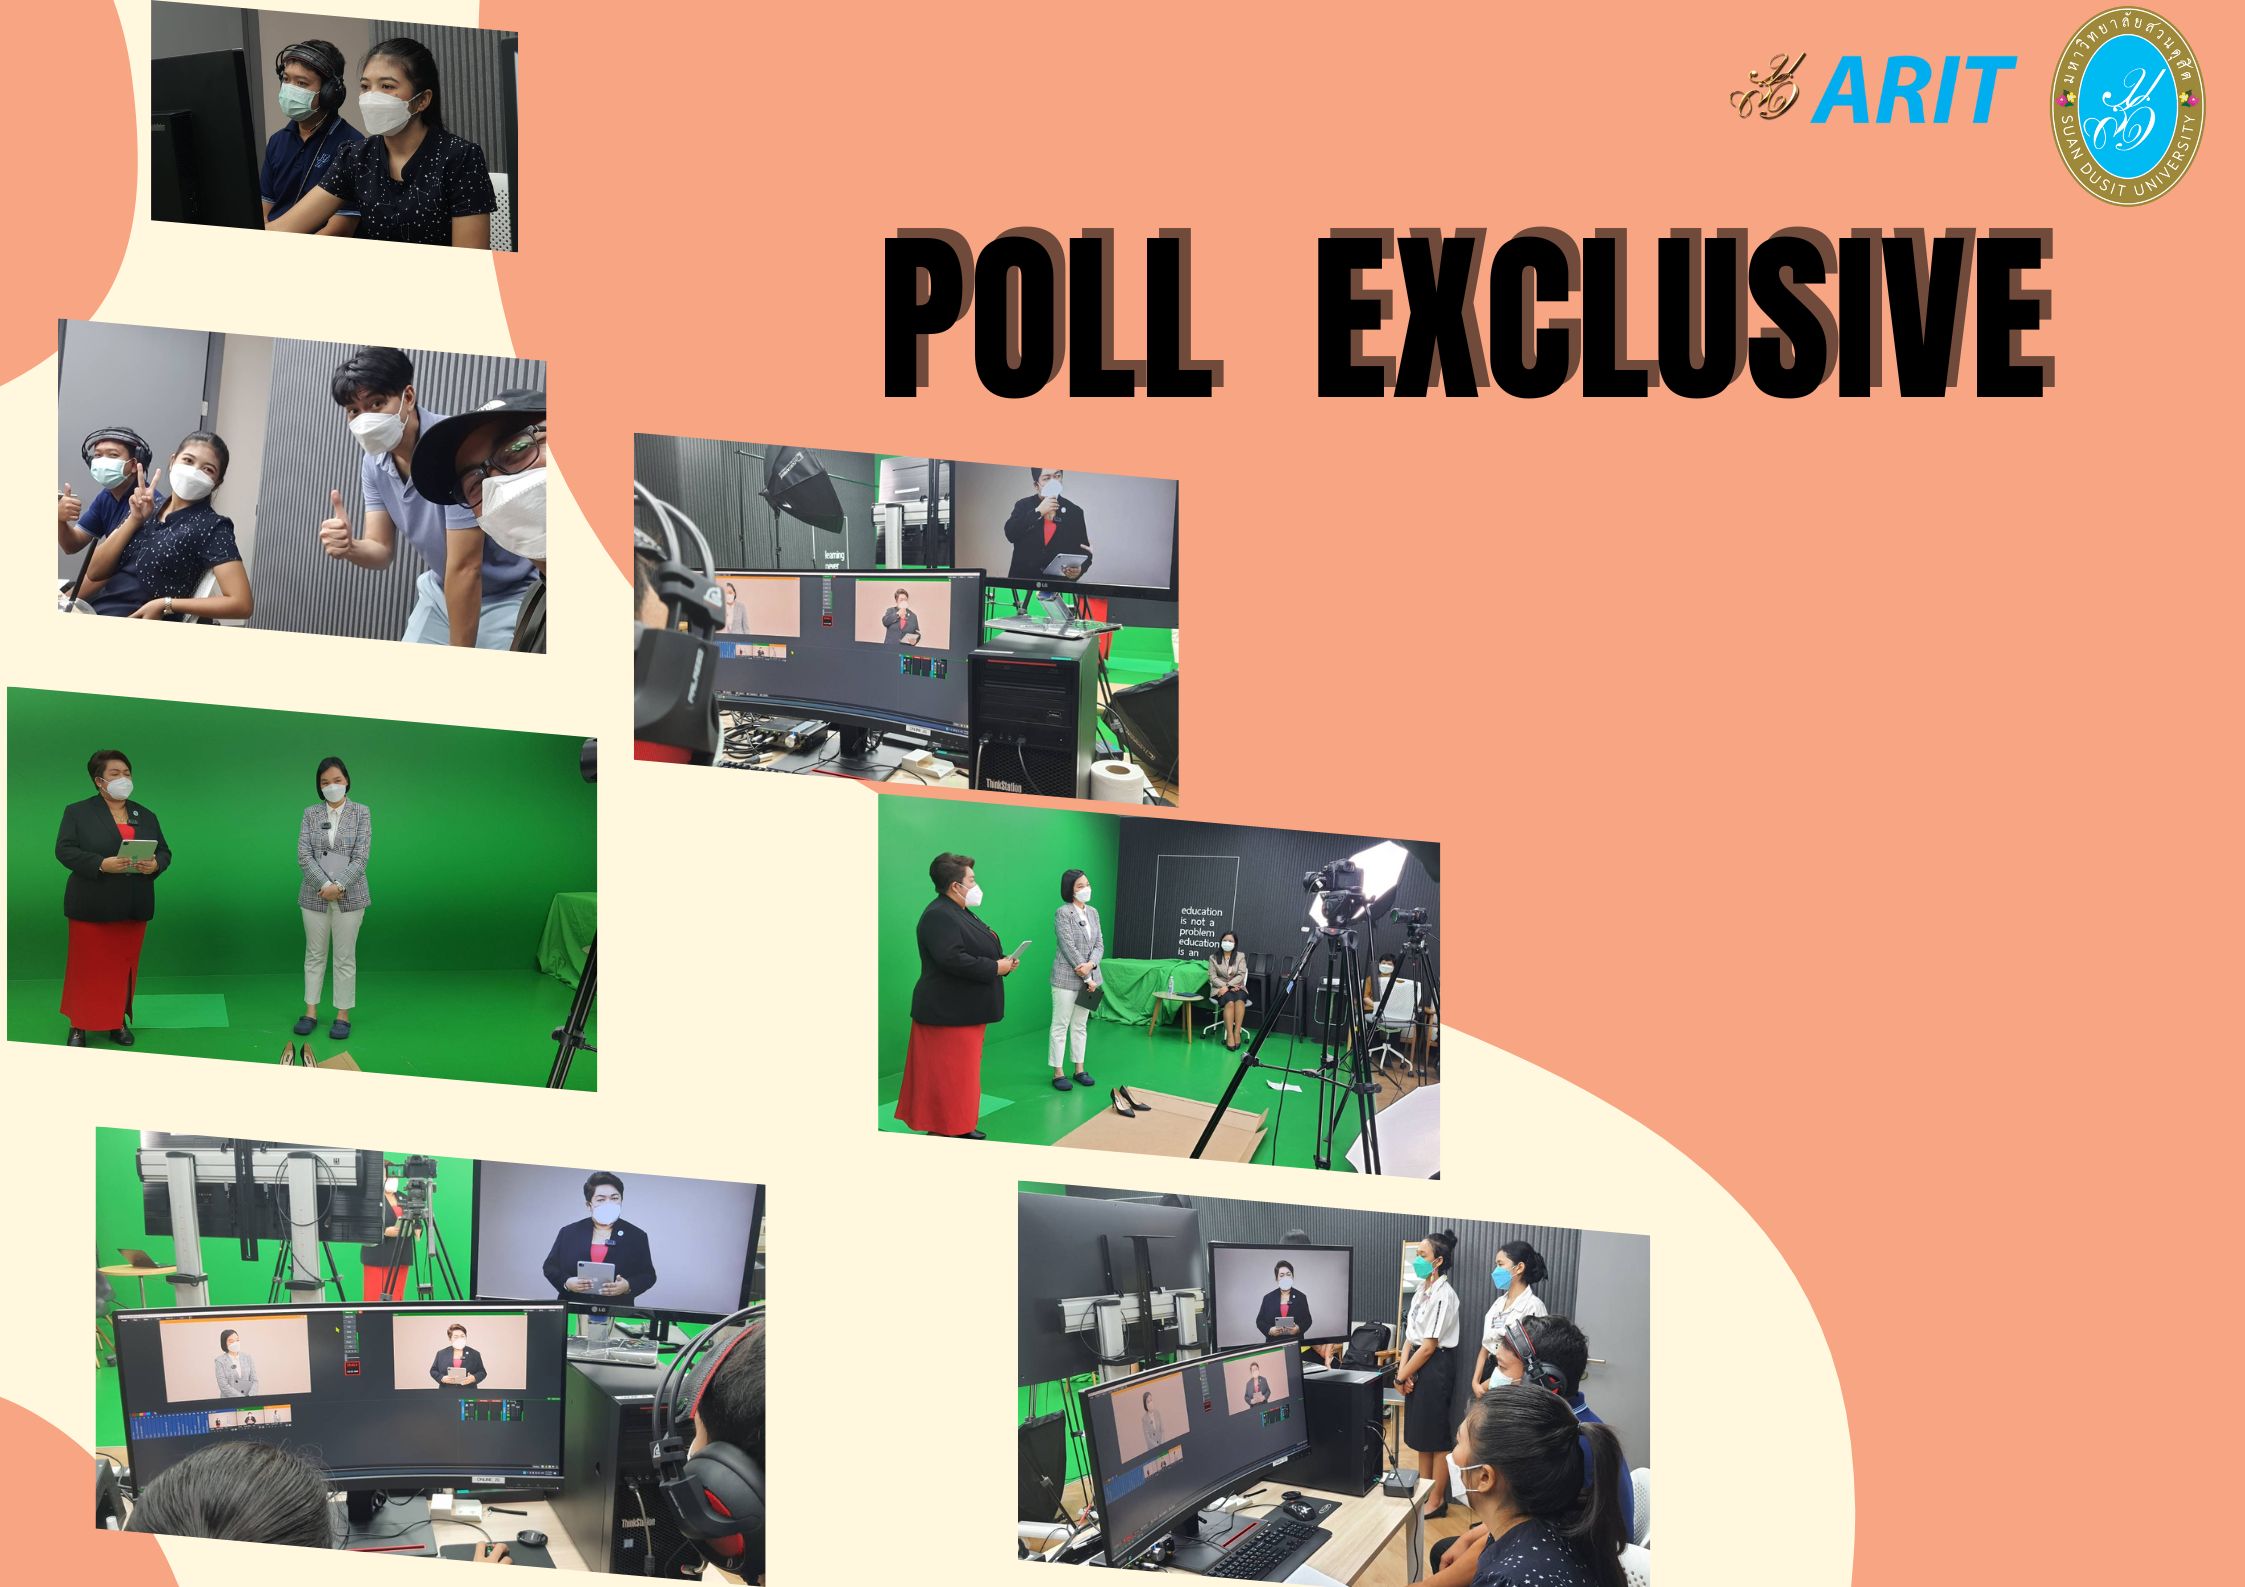 65-05-19-poll exclusive